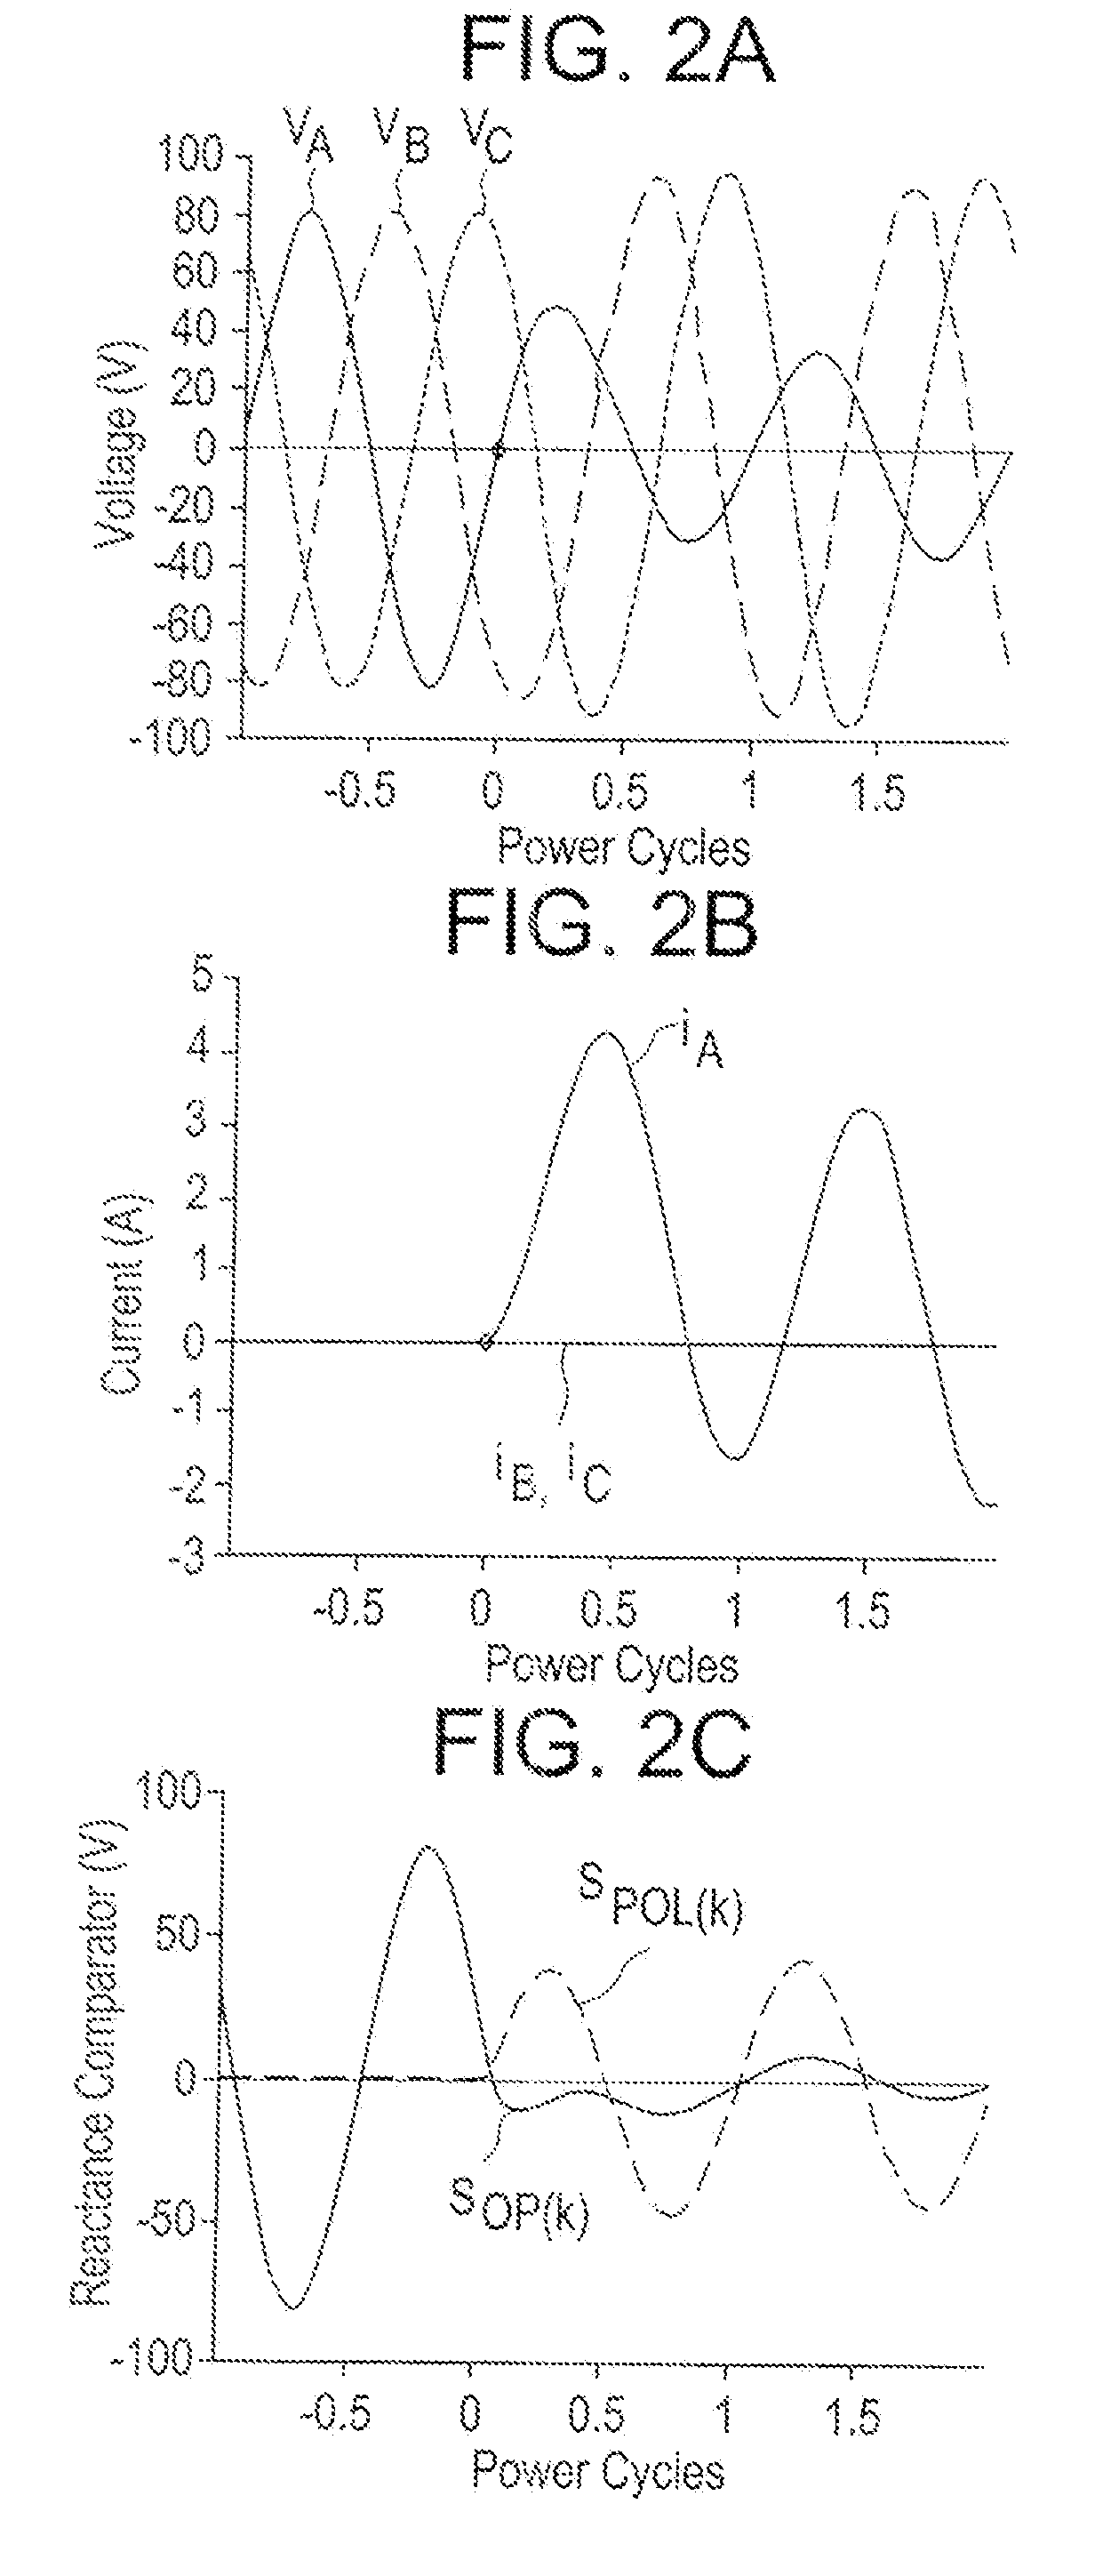 Fast impedance protection technique immune to dynamic errors of capacitive voltage transformers